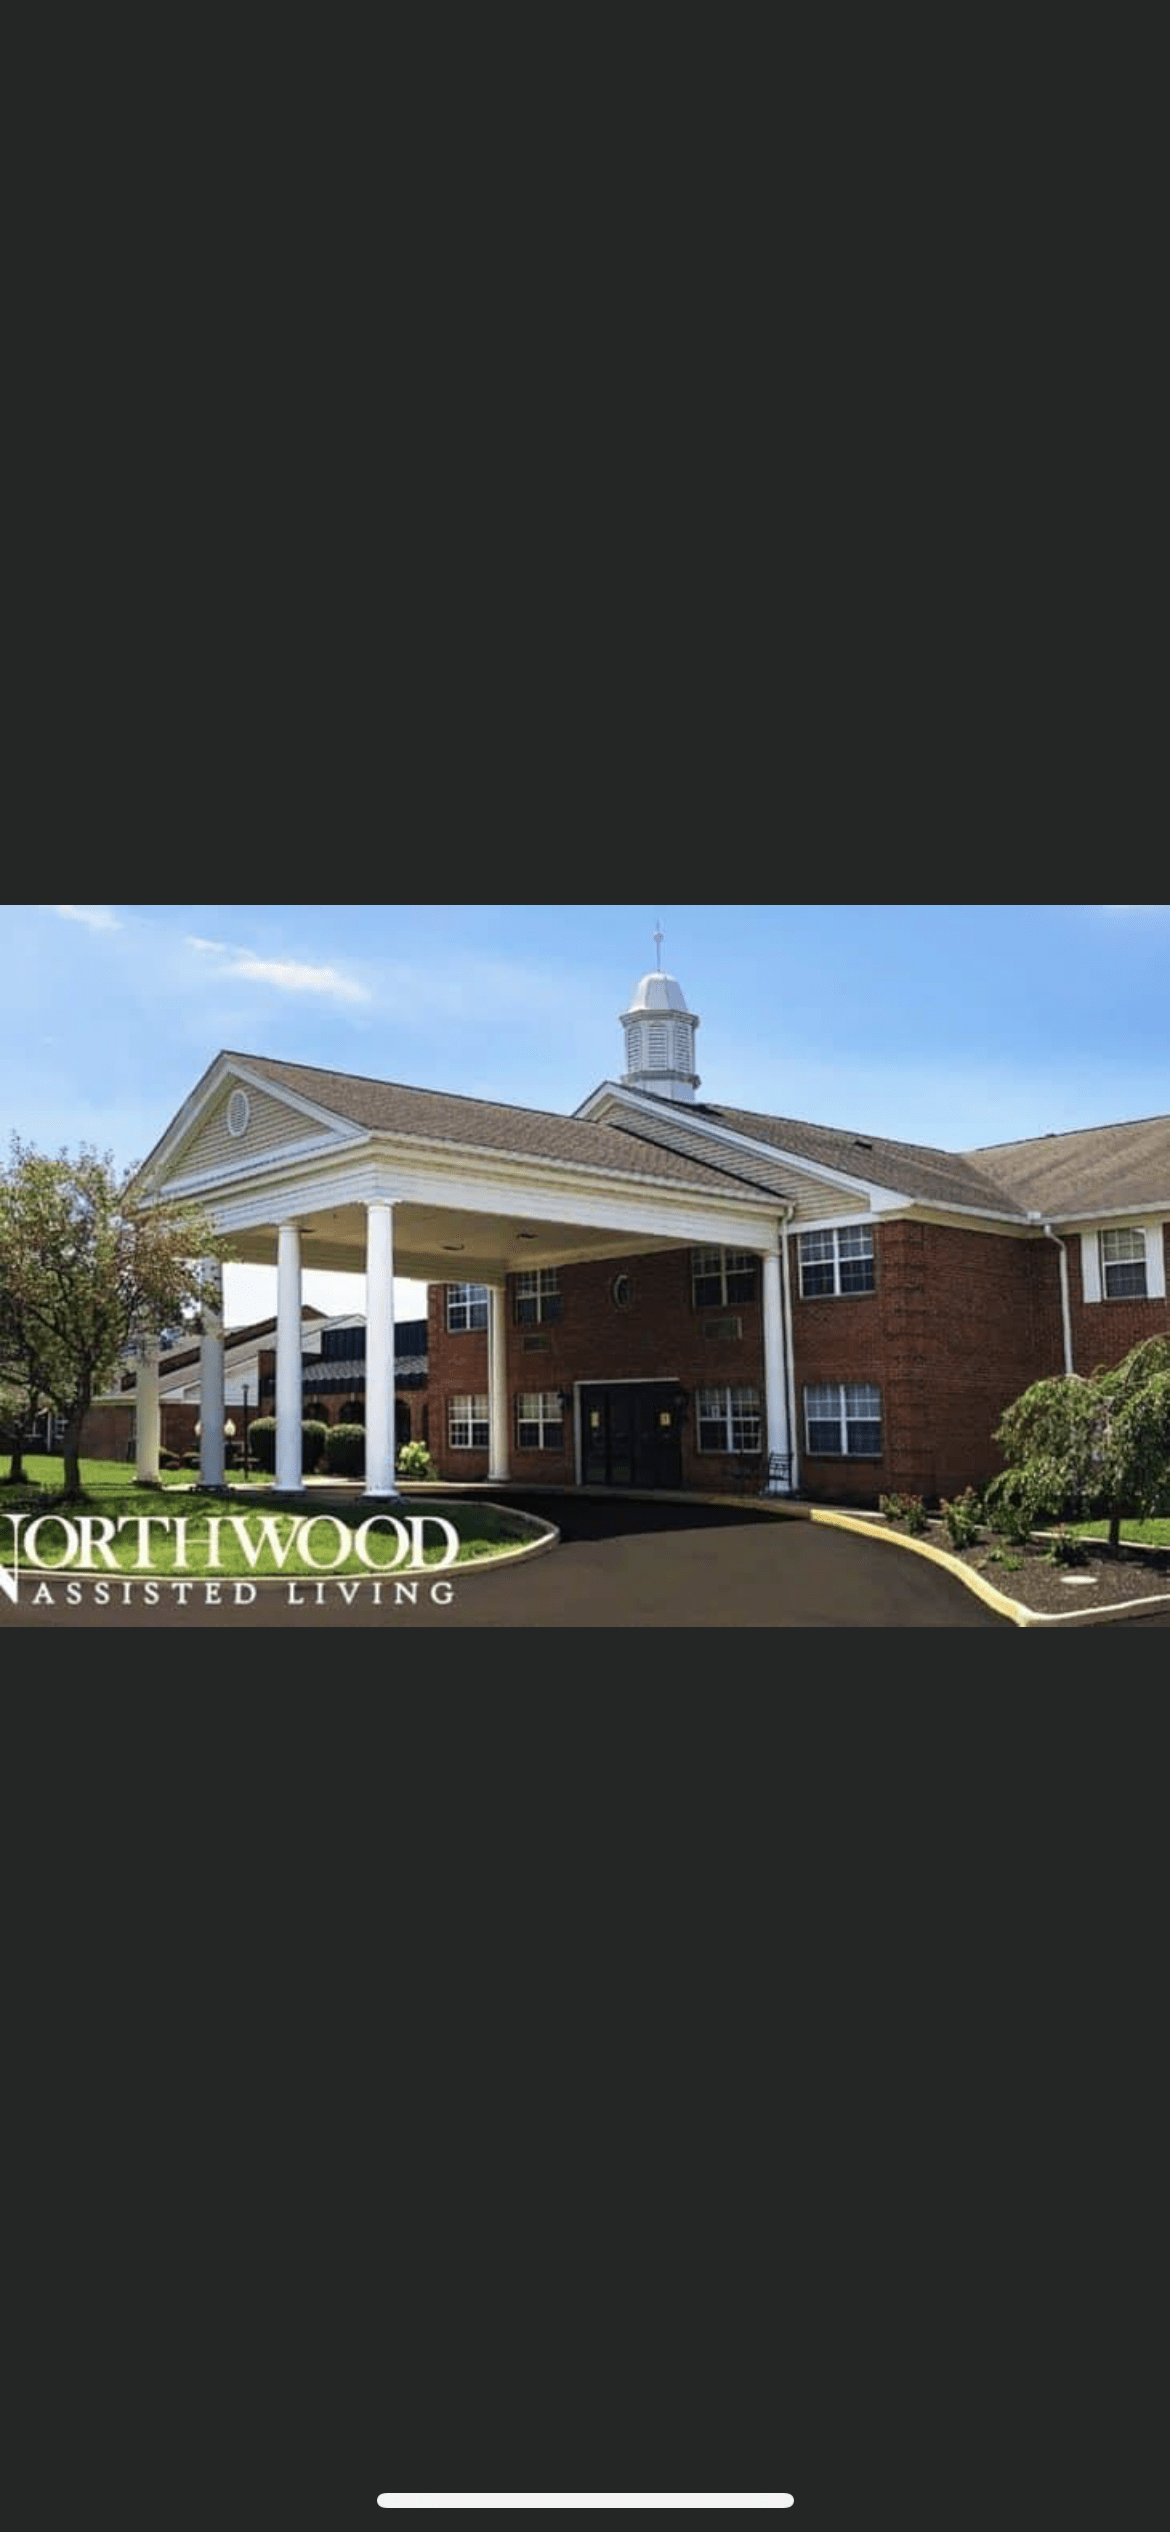 Northwood Assisted Living 